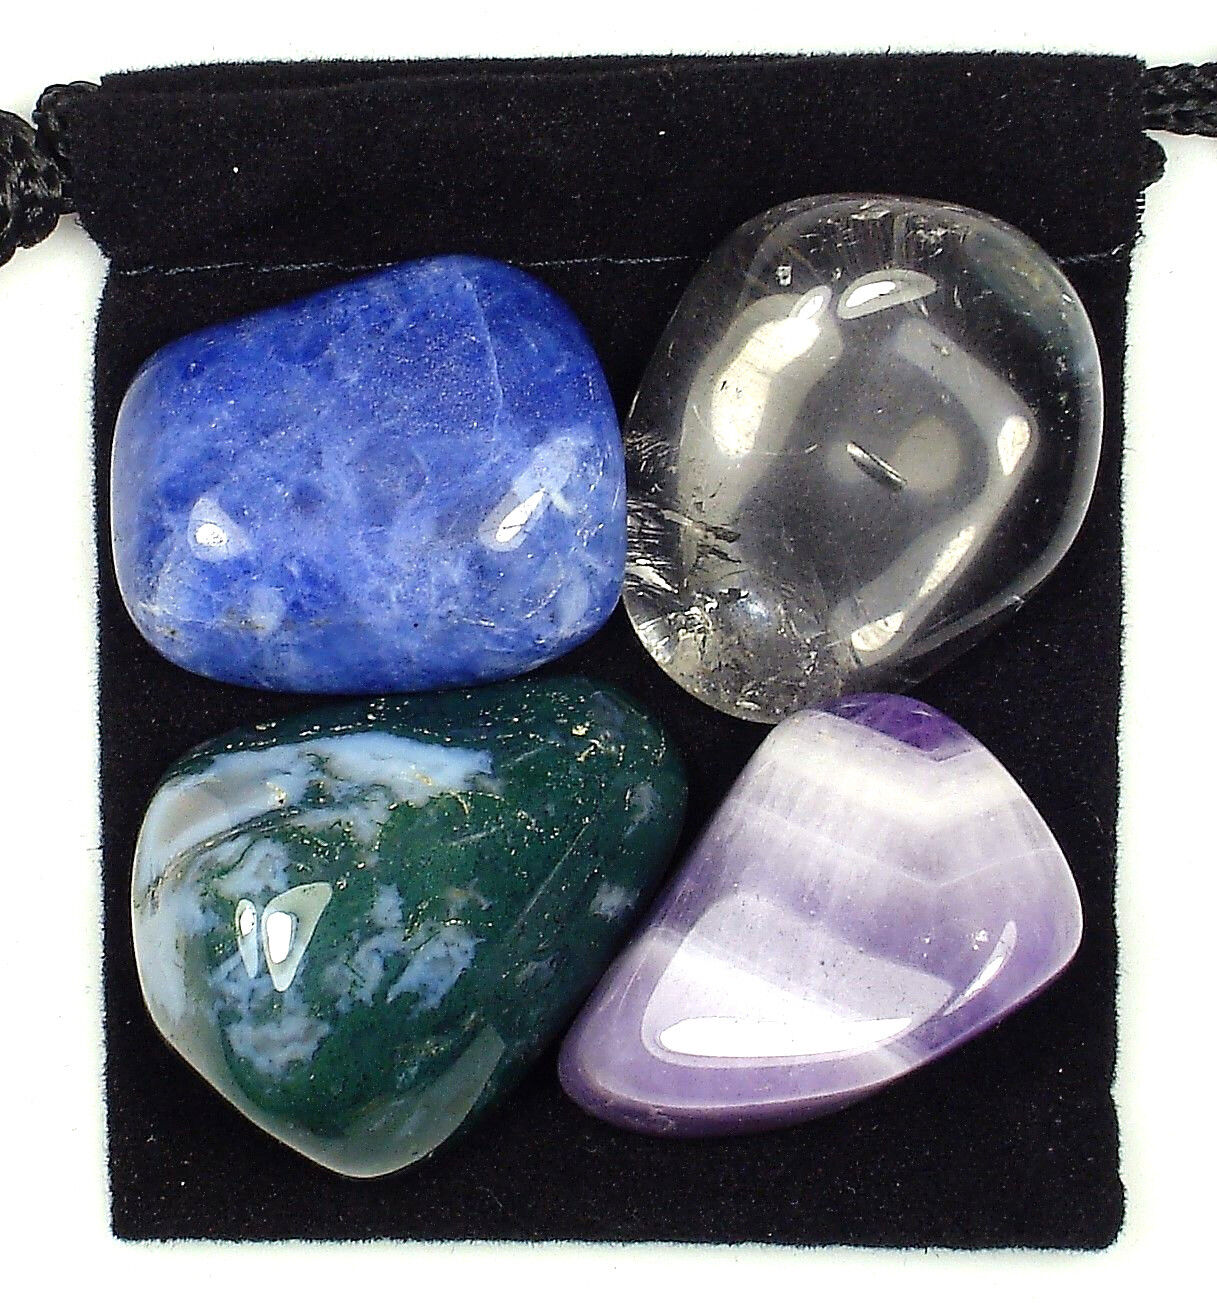 IMMUNE SYSTEM BOOST Tumbled Crystal Healing Set = 4 Stones + Pouch + Card